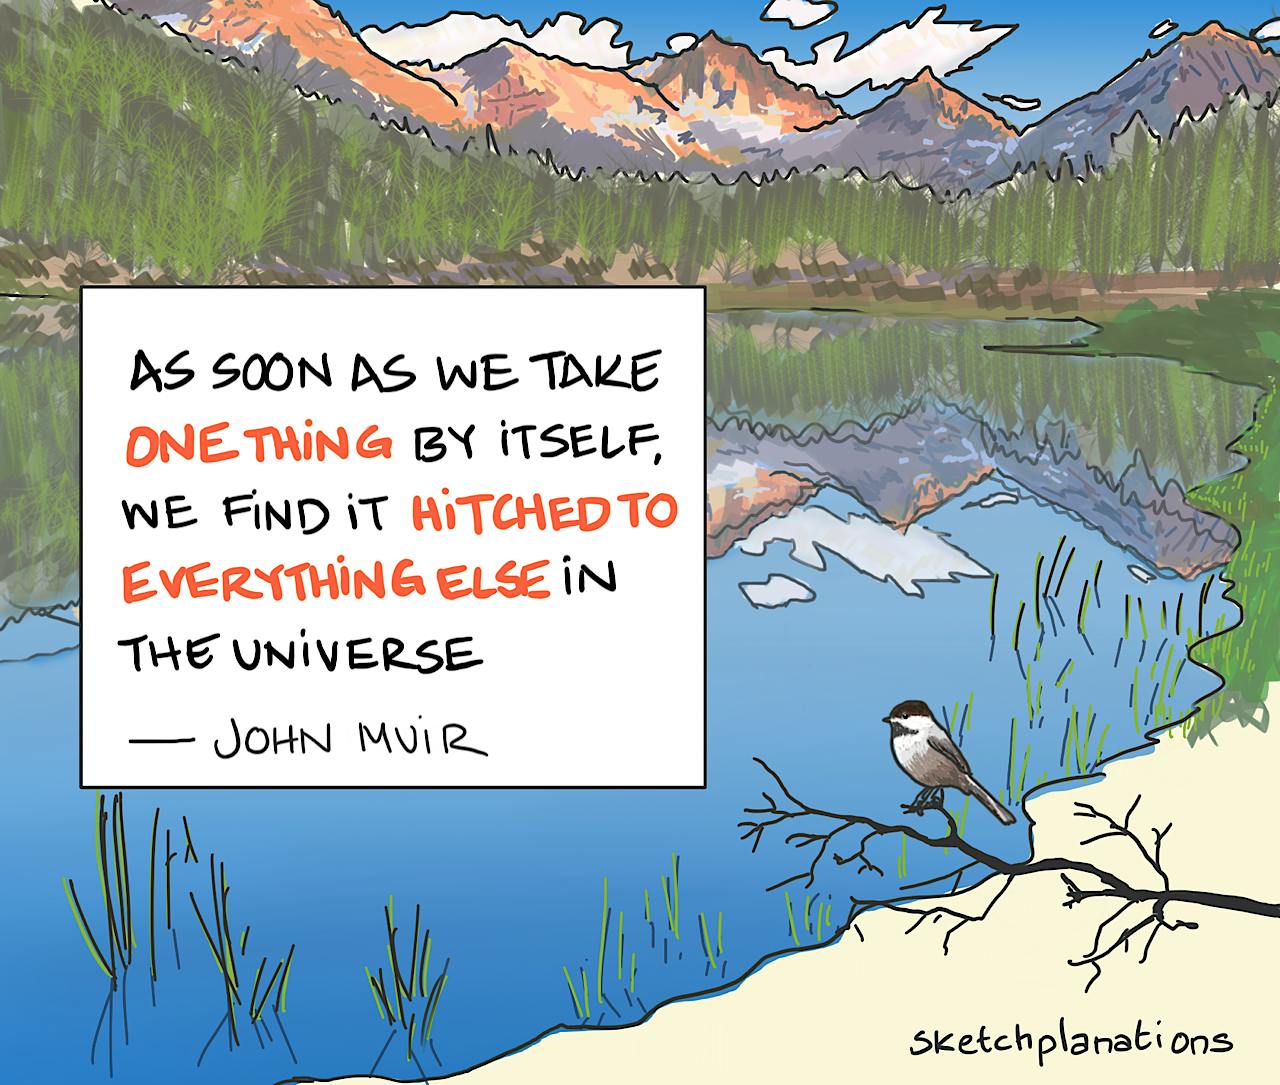 John Muir quote illustration with a Sierra Nevada lake and distant mountains with a mountain chickadee bird on a branch in the foreground and the quote "As soon as we take one thing by itself, we find it hitched to everything else in the universe."